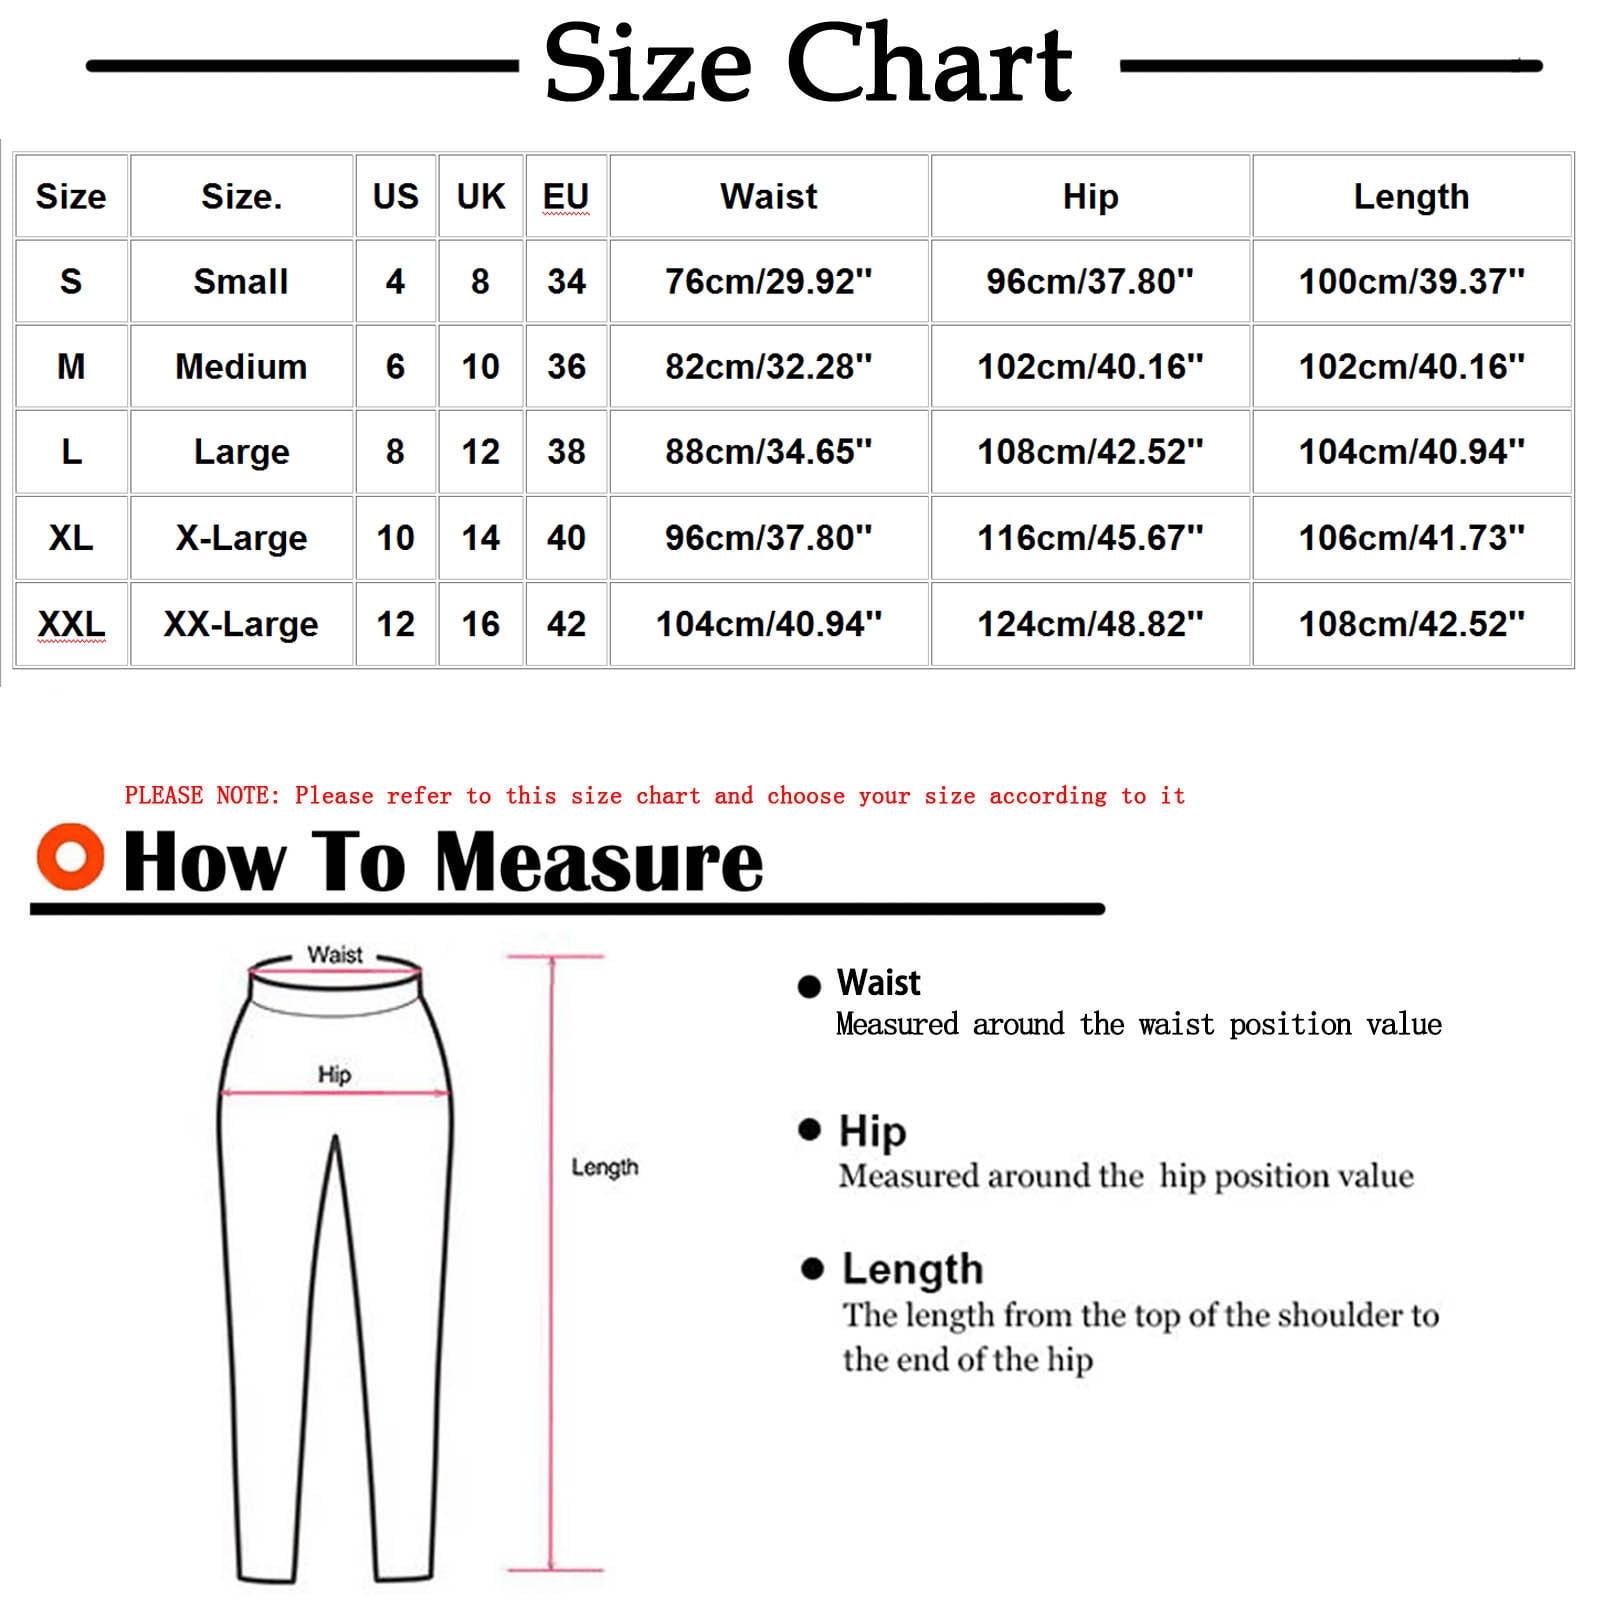 Women's Bootleg Yoga Pants Crossover High Waisted Flare Leggings Casual  Workout Bell Bottom with Pockets 